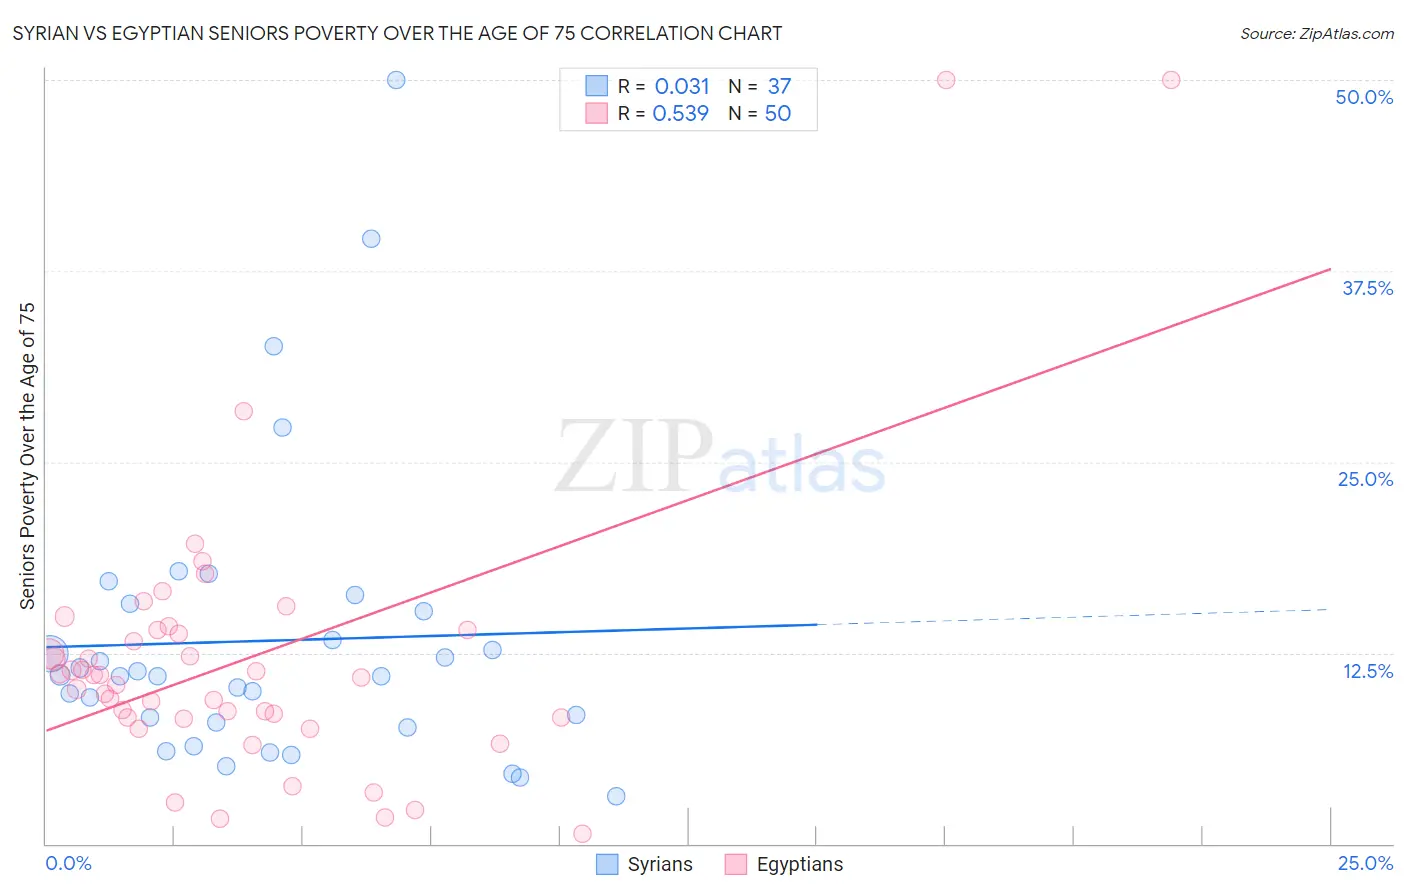 Syrian vs Egyptian Seniors Poverty Over the Age of 75